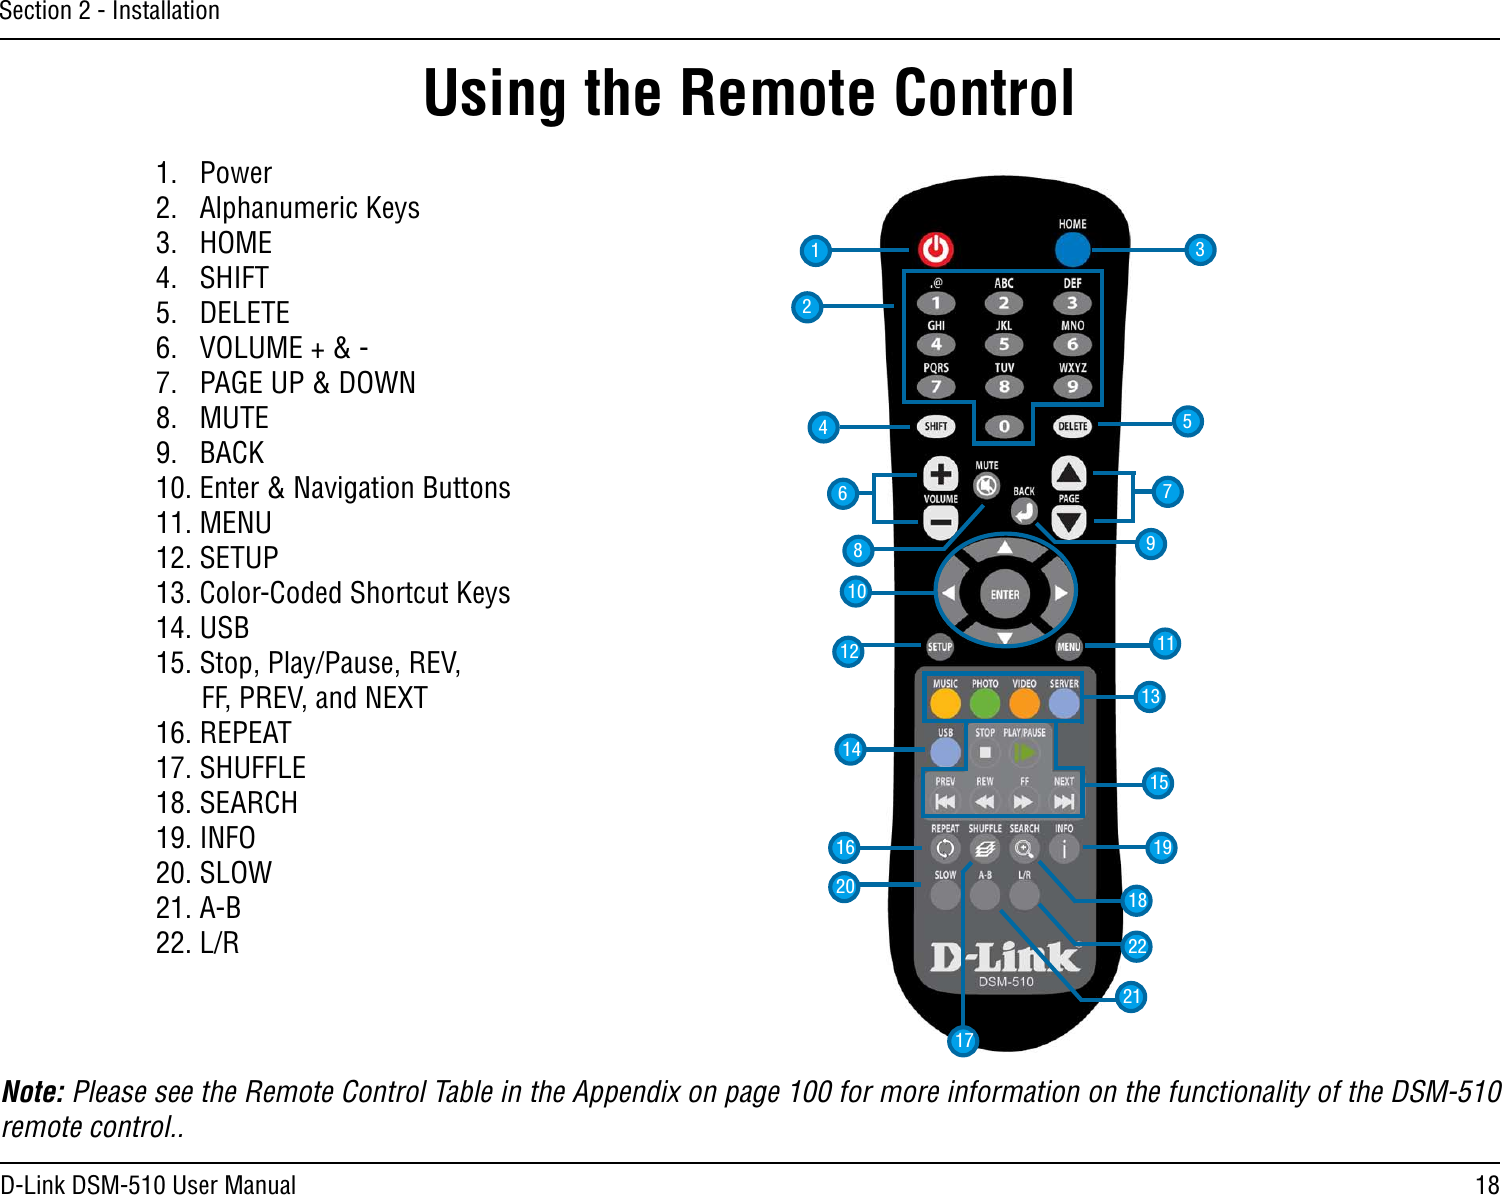 18D-Link DSM-510 User ManualSection 2 - InstallationUsing the Remote Control1.   Power2.   Alphanumeric Keys3.   HOME4.   SHIFT5.   DELETE6.   VOLUME + &amp; -7.   PAGE UP &amp; DOWN8.   MUTE9.   BACK10. Enter &amp; Navigation Buttons11. MENU12. SETUP13. Color-Coded Shortcut Keys14. USB15. Stop, Play/Pause, REV,    FF, PREV, and NEXT16. REPEAT17. SHUFFLE18. SEARCH19. INFO20. SLOW21. A-B22. L/R13248567911101213141516171819202221Note: Please see the Remote Control Table in the Appendix on page 100 for more information on the functionality of the DSM-510 remote control.. 